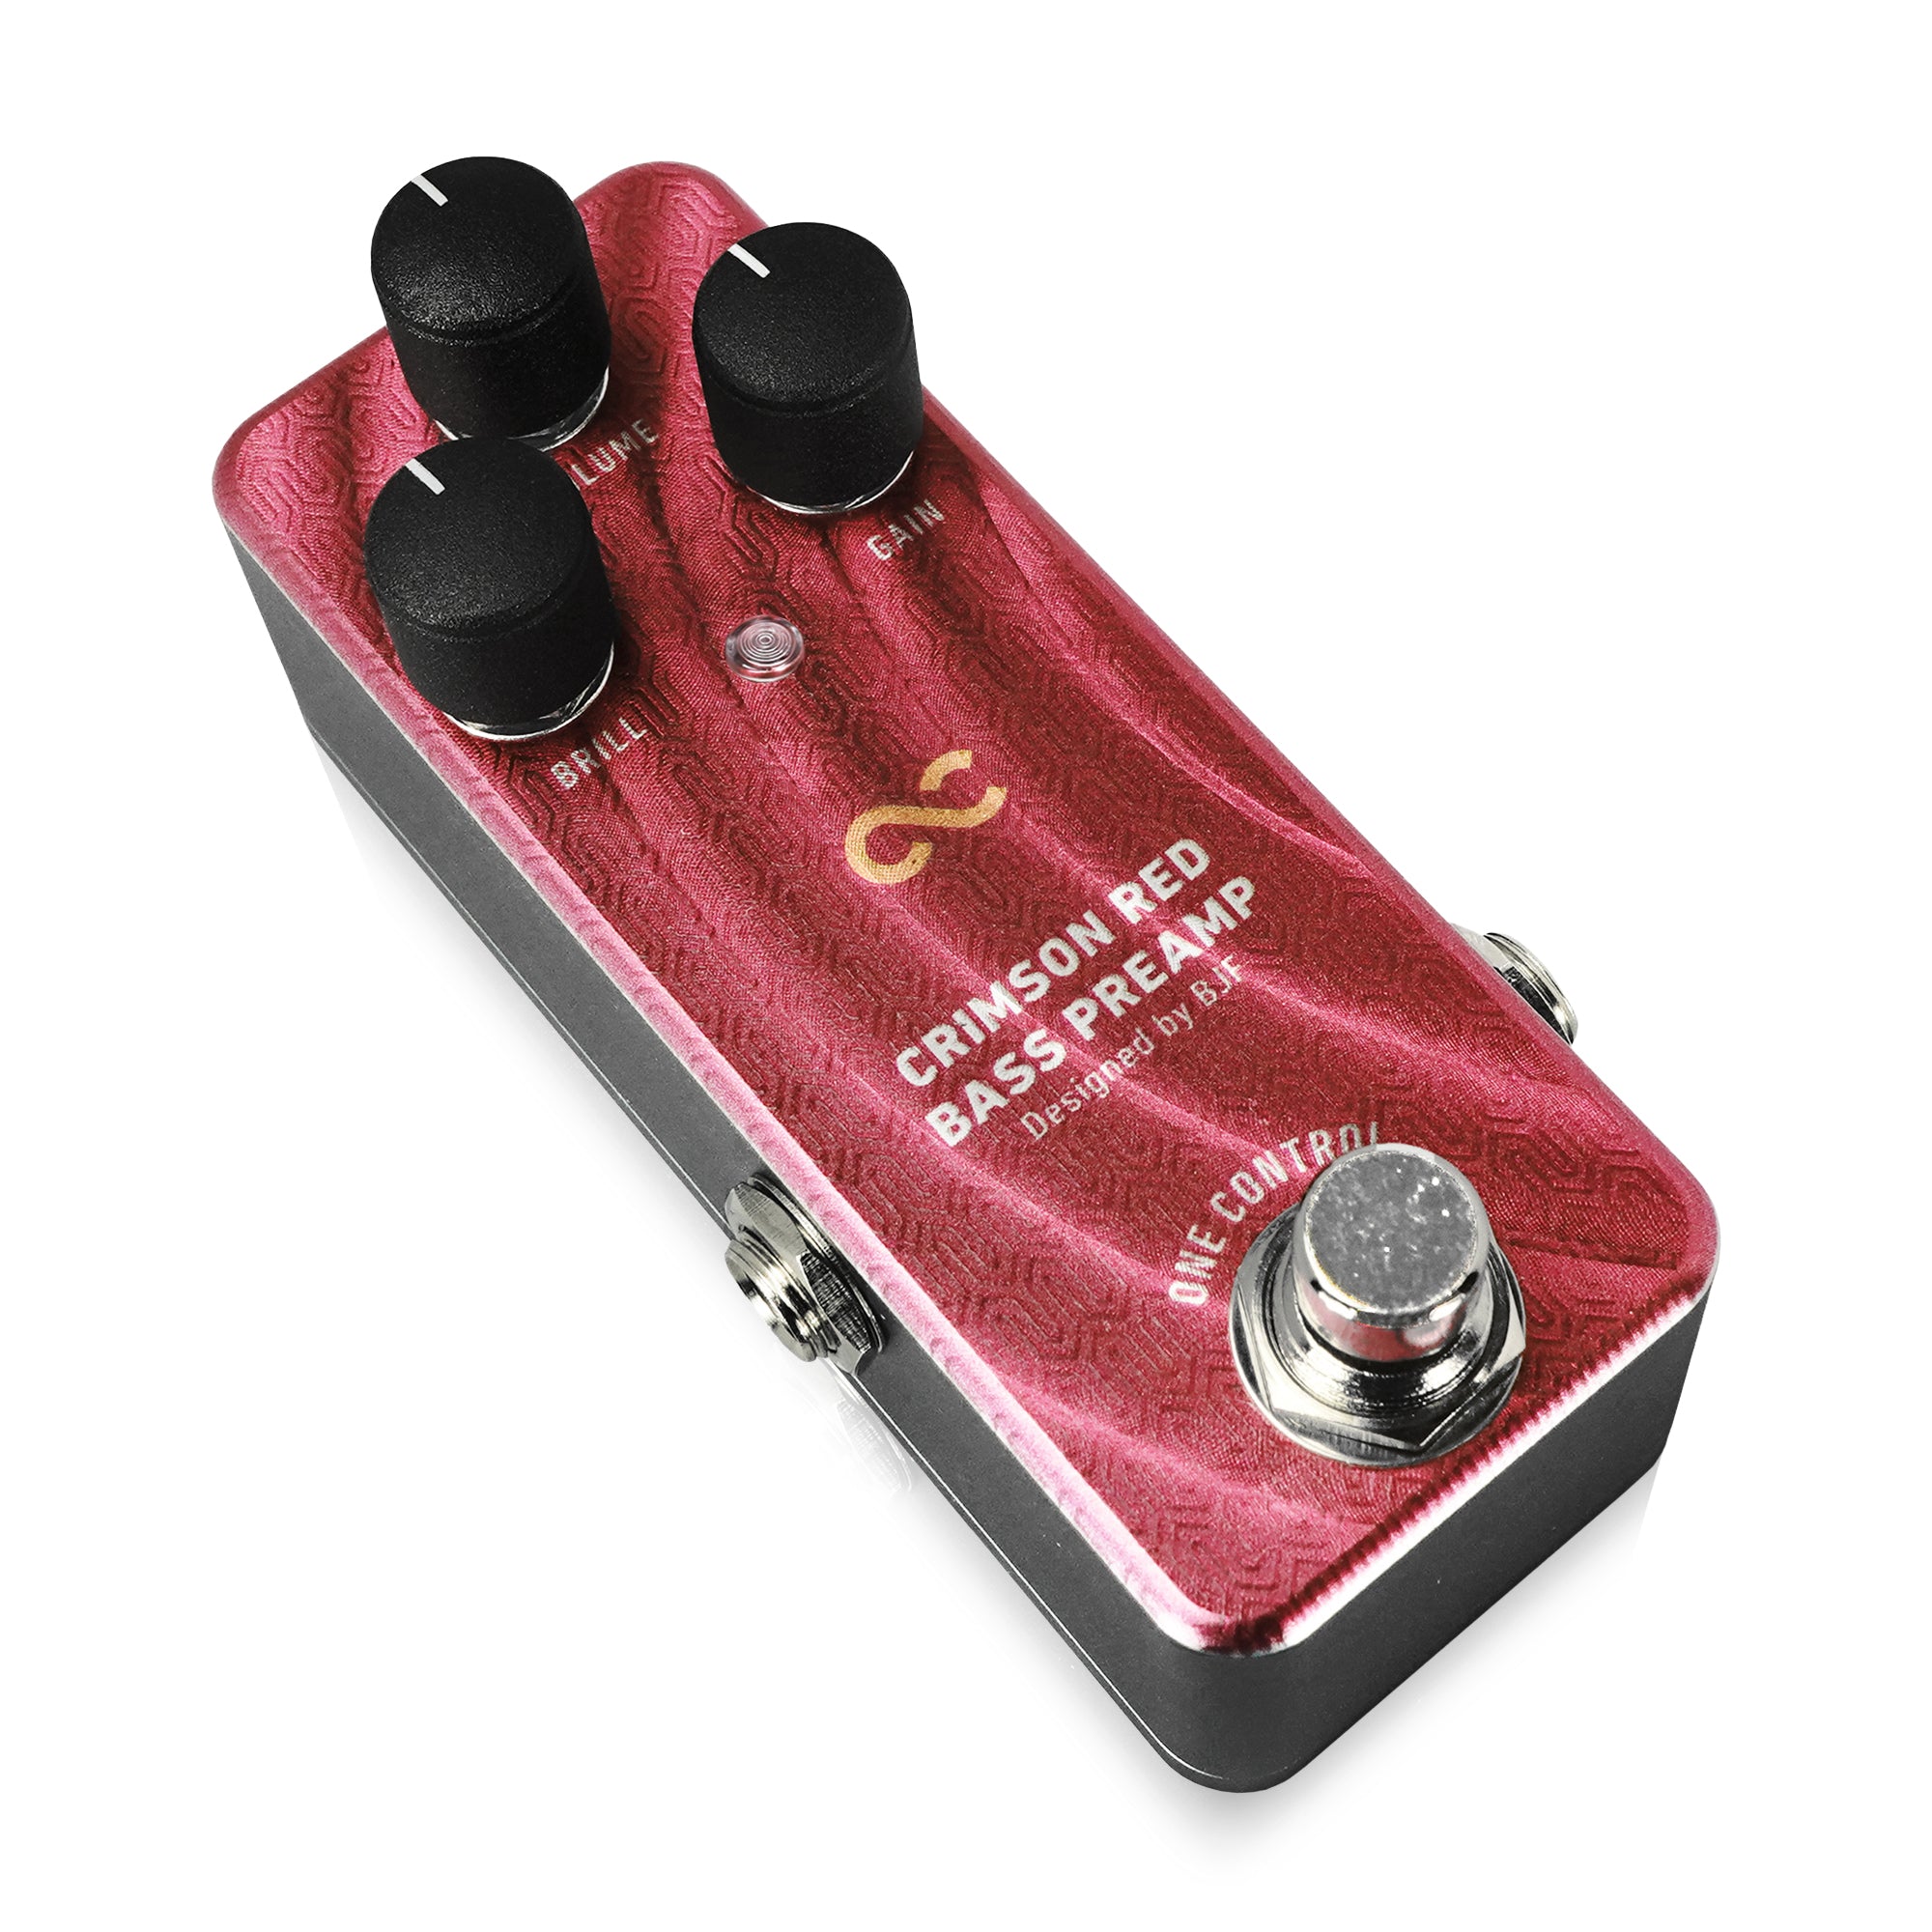 One Control CRIMSON RED BASS PREAMP